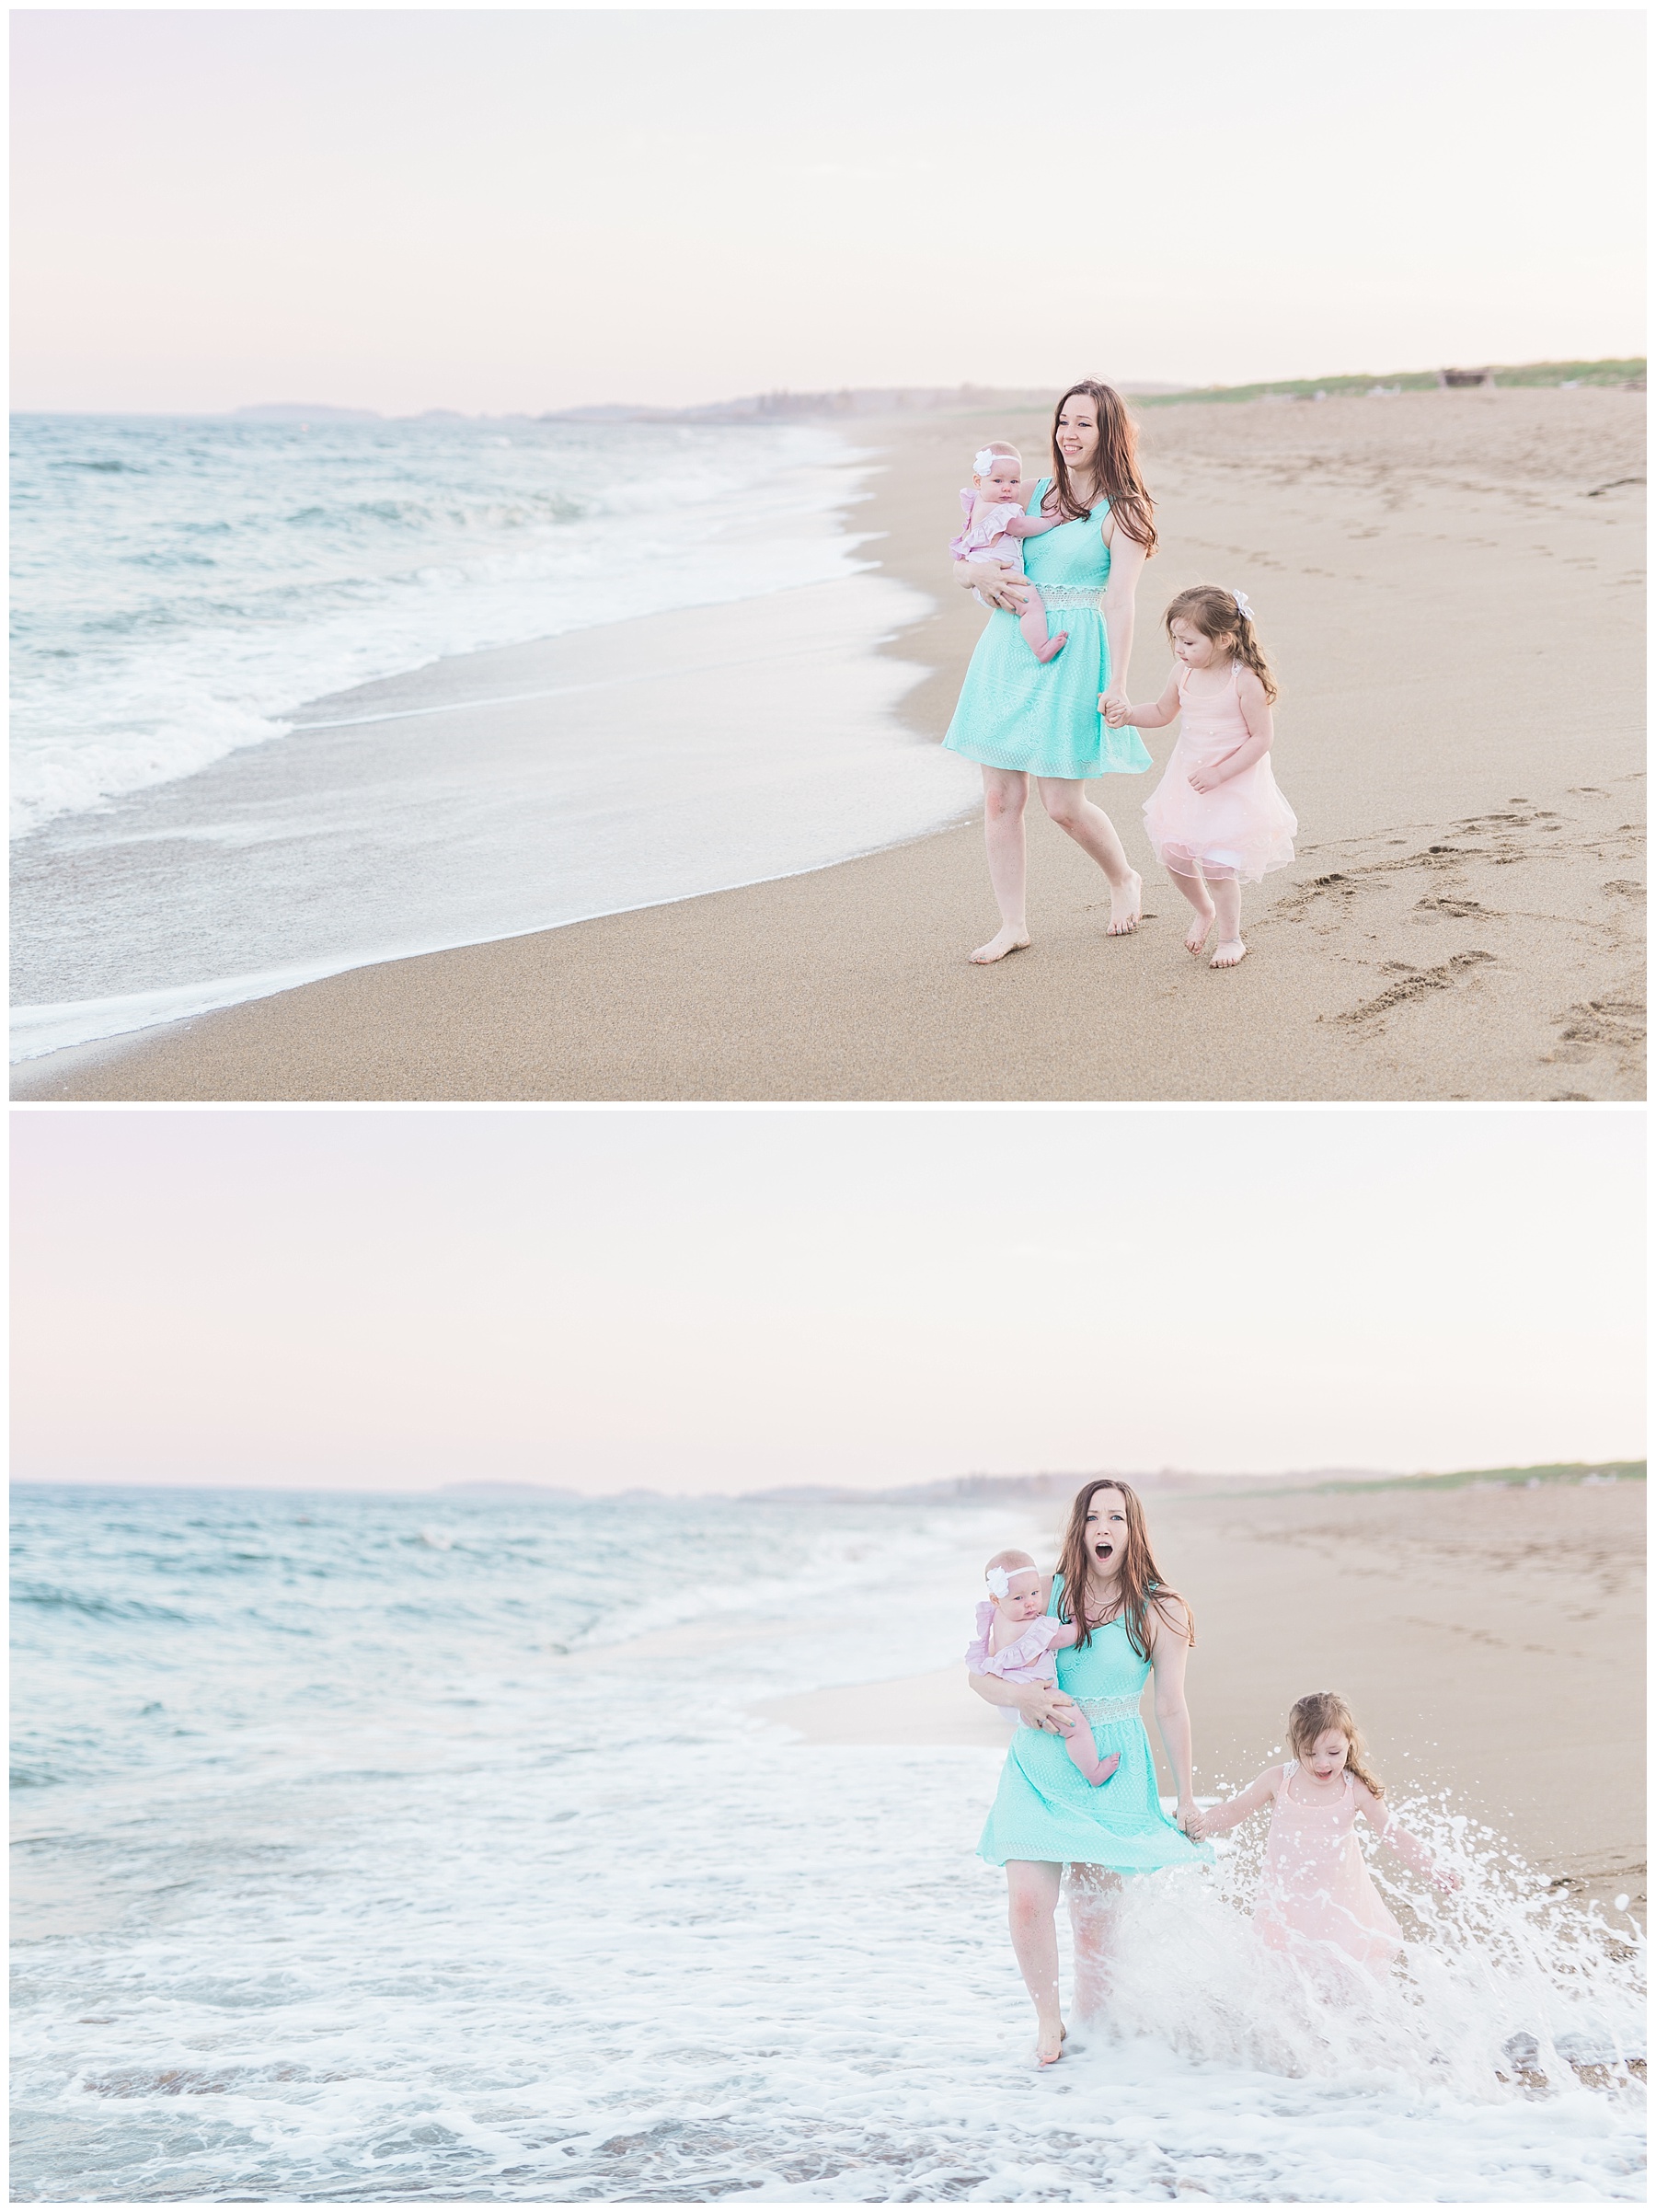 mommy and baby standing on the beach for a mommy and me session with her daughter with toddler and waves splashing